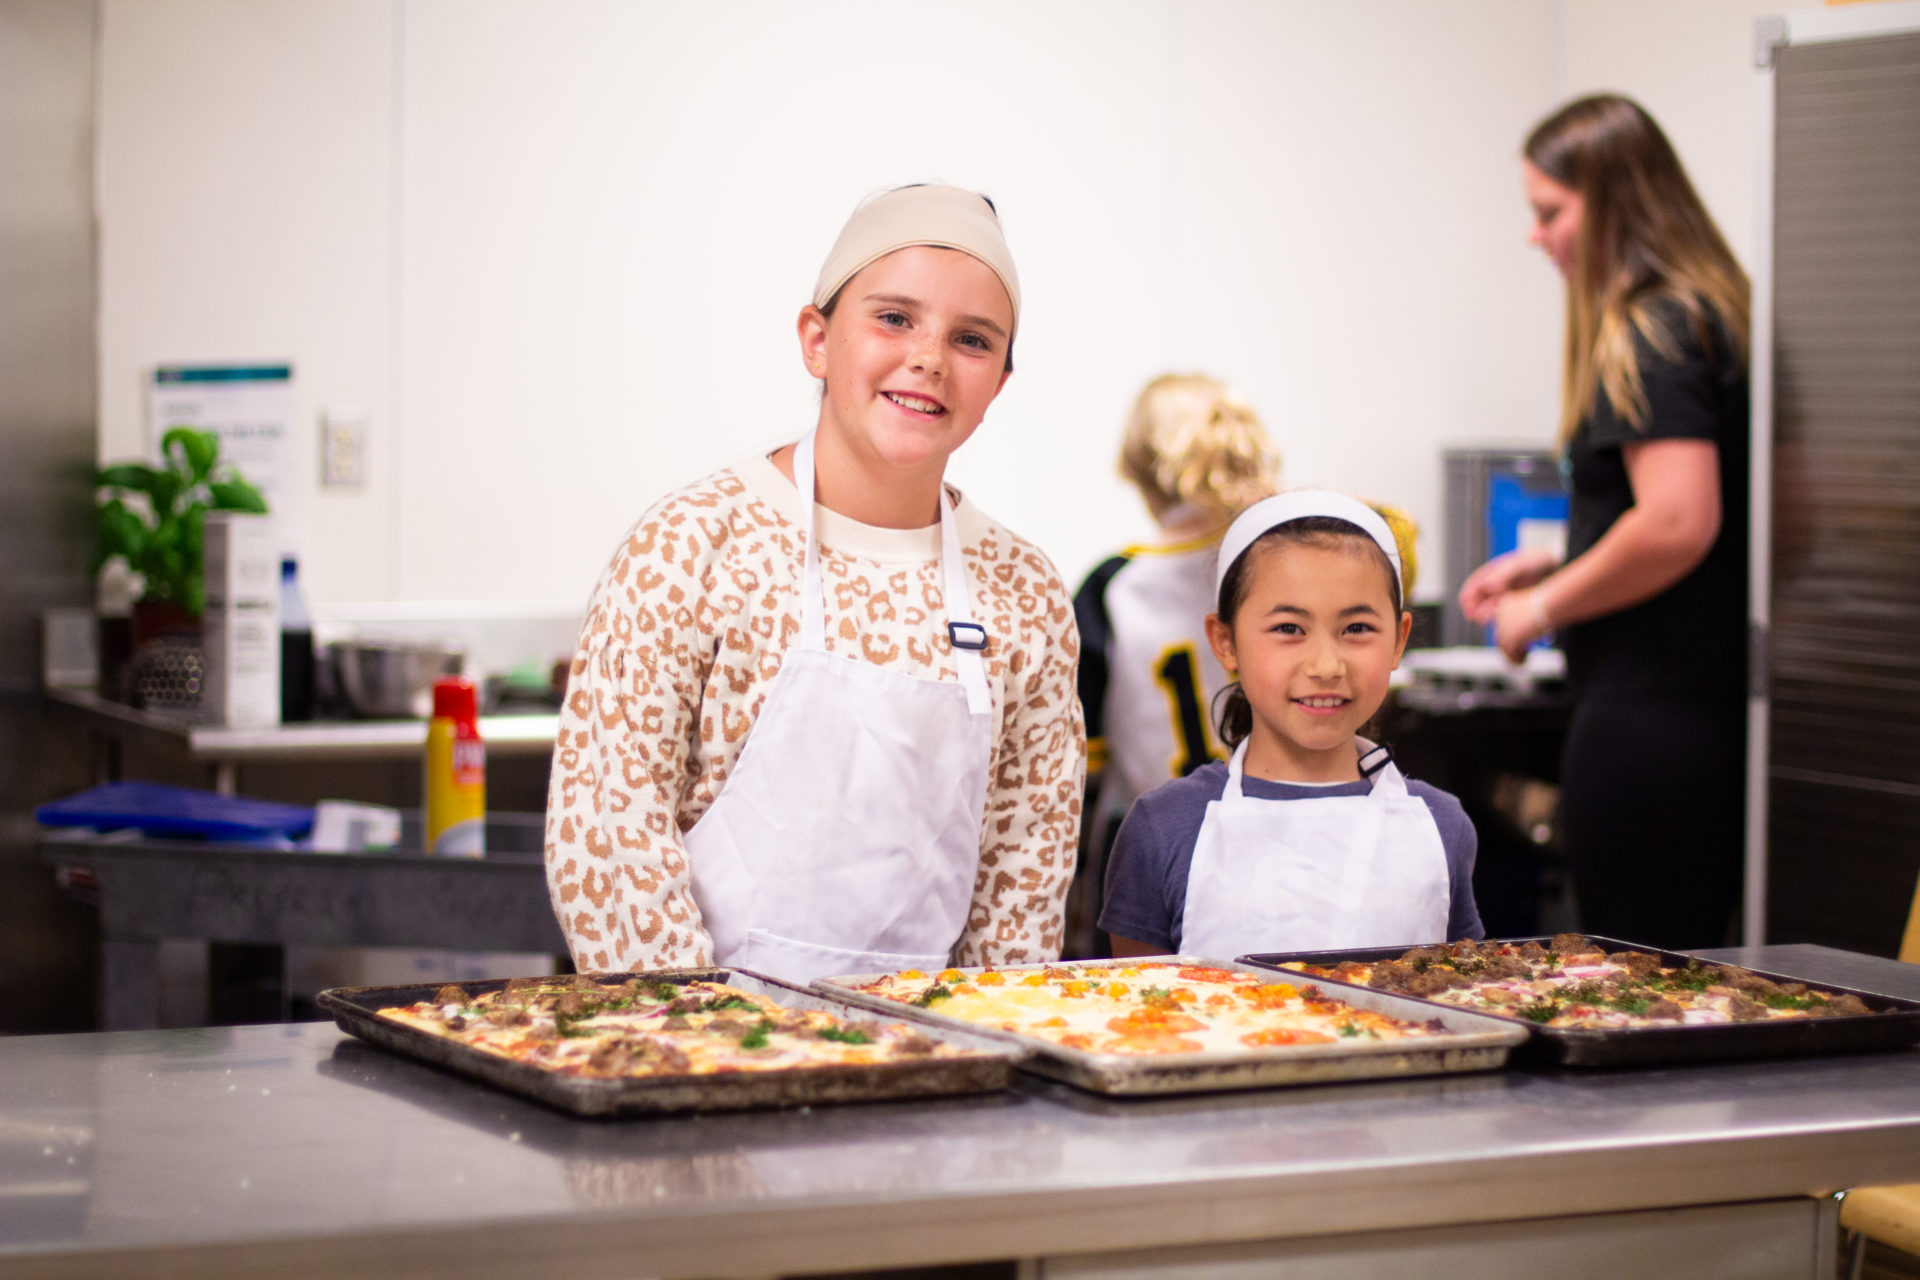 Campers smiling as they serve up pizza.